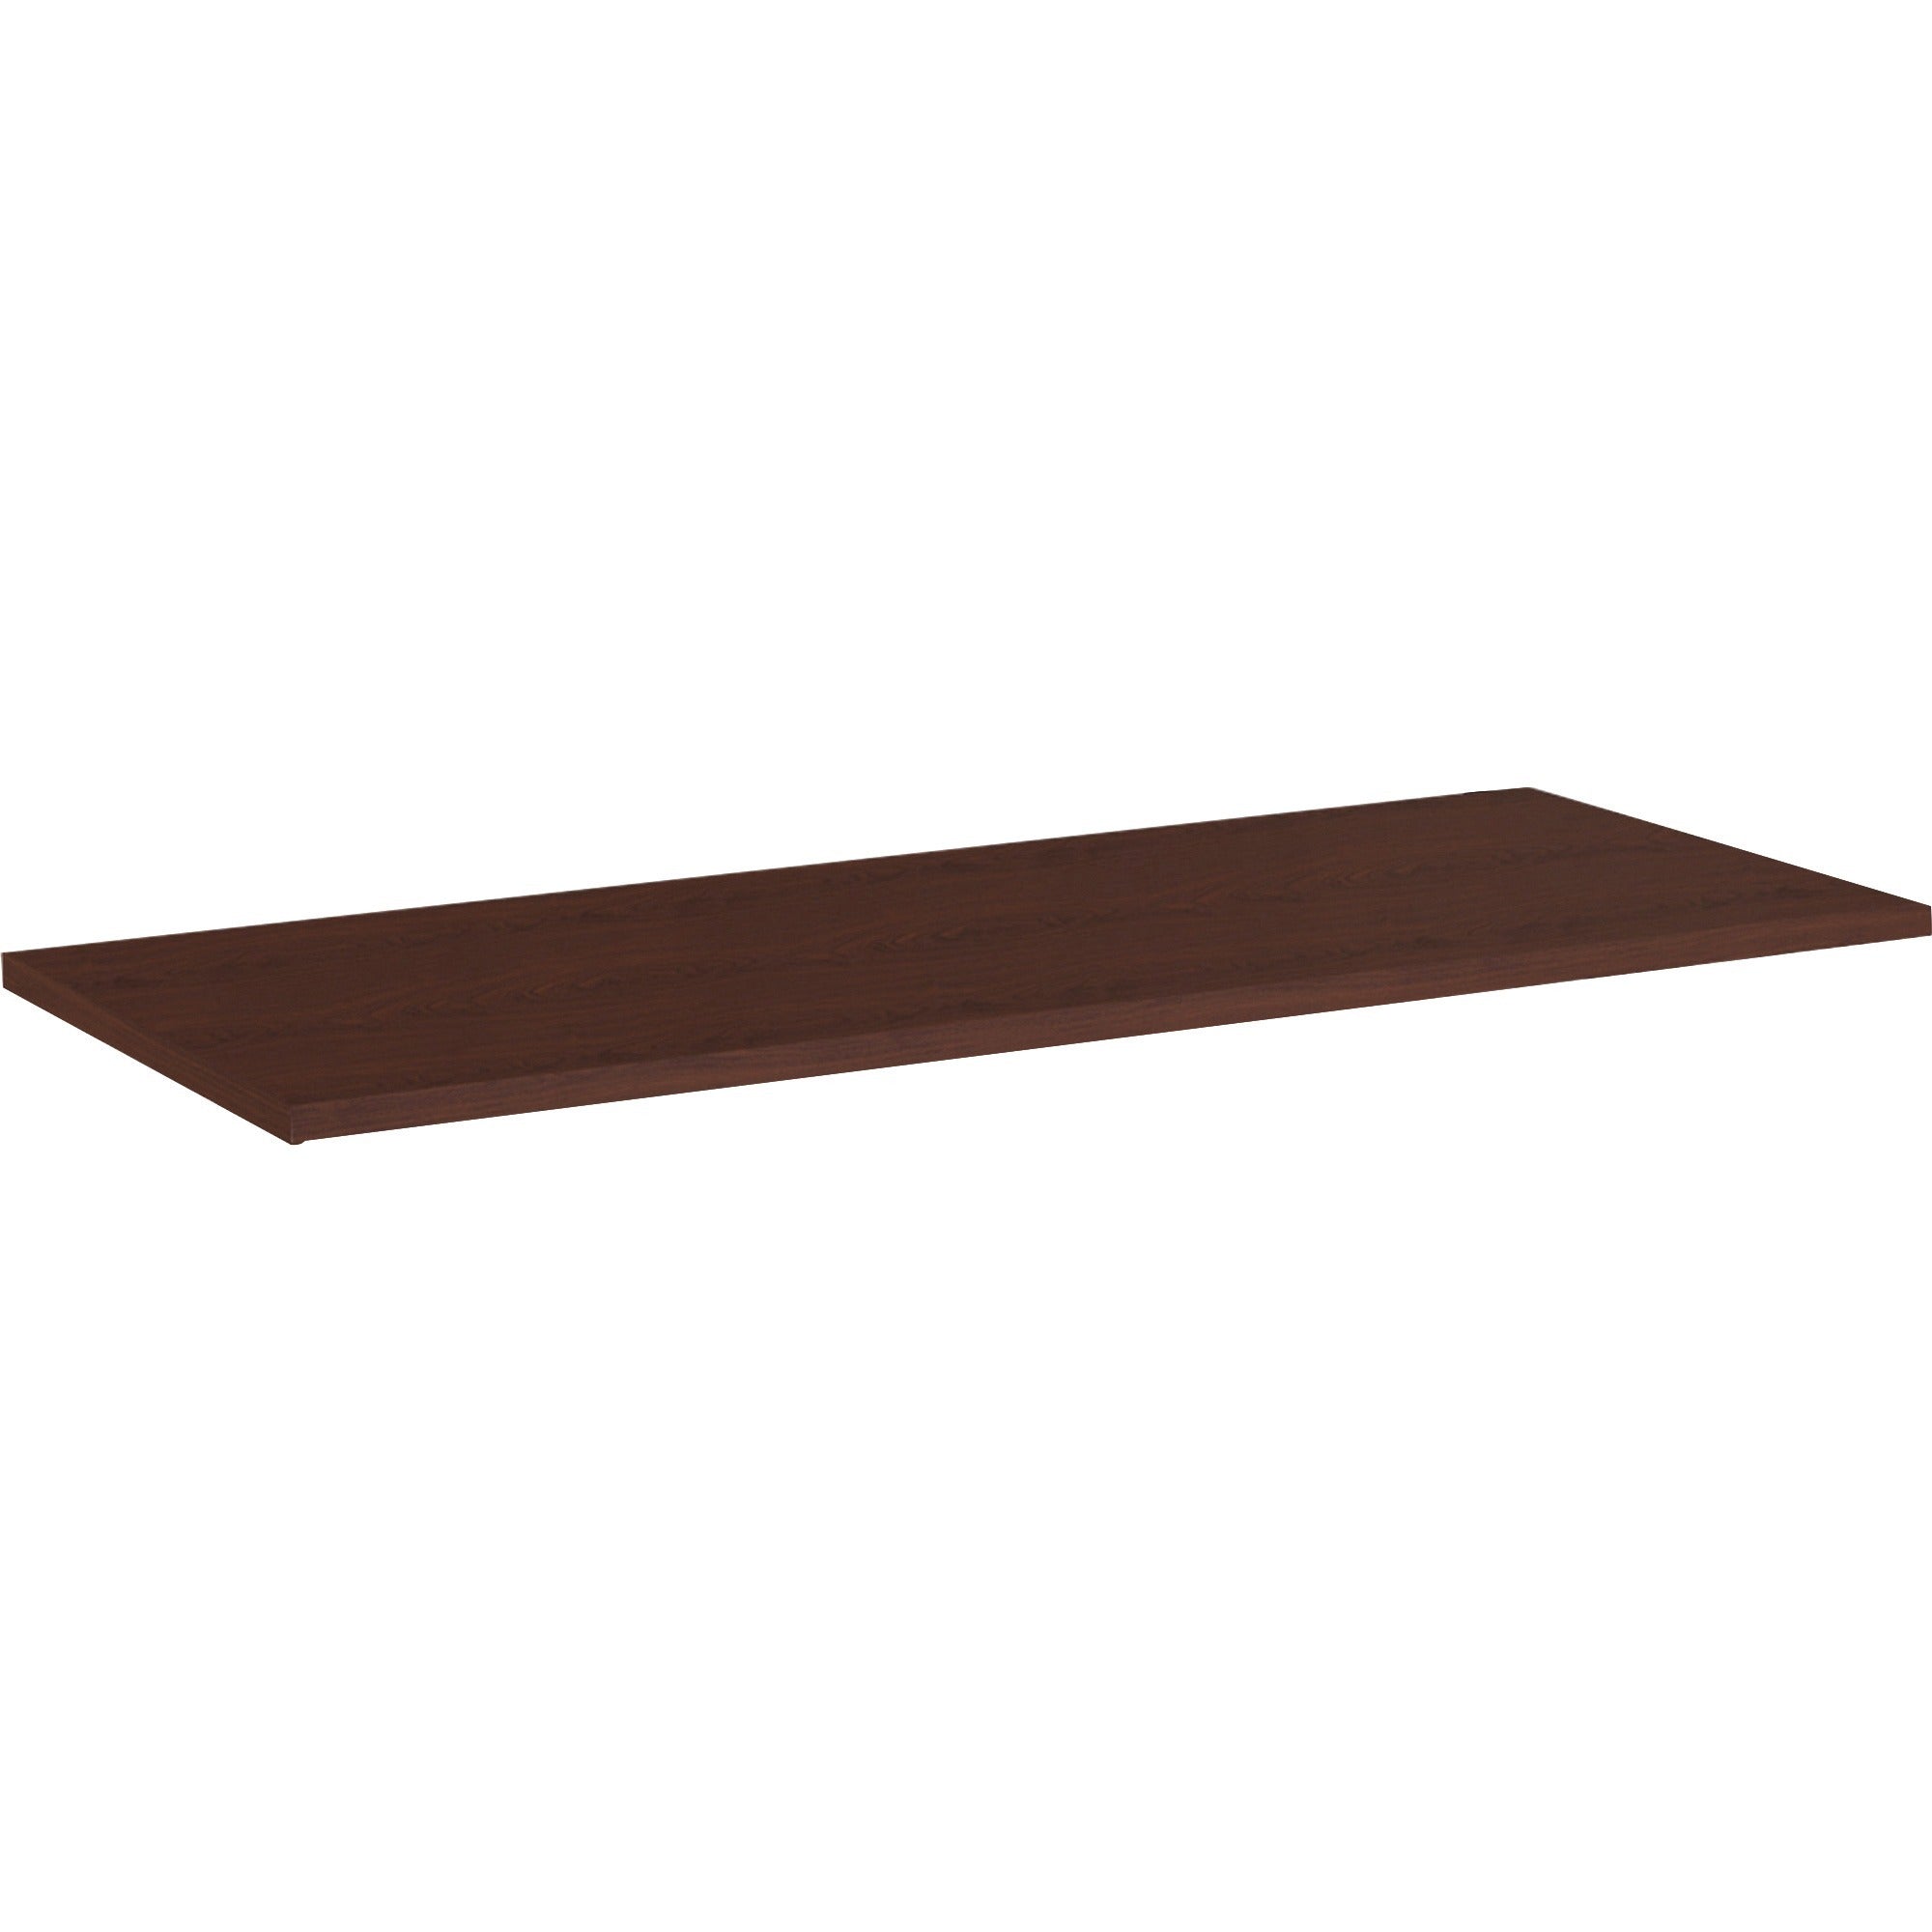 special-t-kingston-60w-table-laminate-tabletop-for-table-topmahogany-rectangle-low-pressure-laminate-lpl-top-60-table-top-length-x-24-table-top-width-x-1-table-top-thickness-1-each_sctsp2460mhg - 1